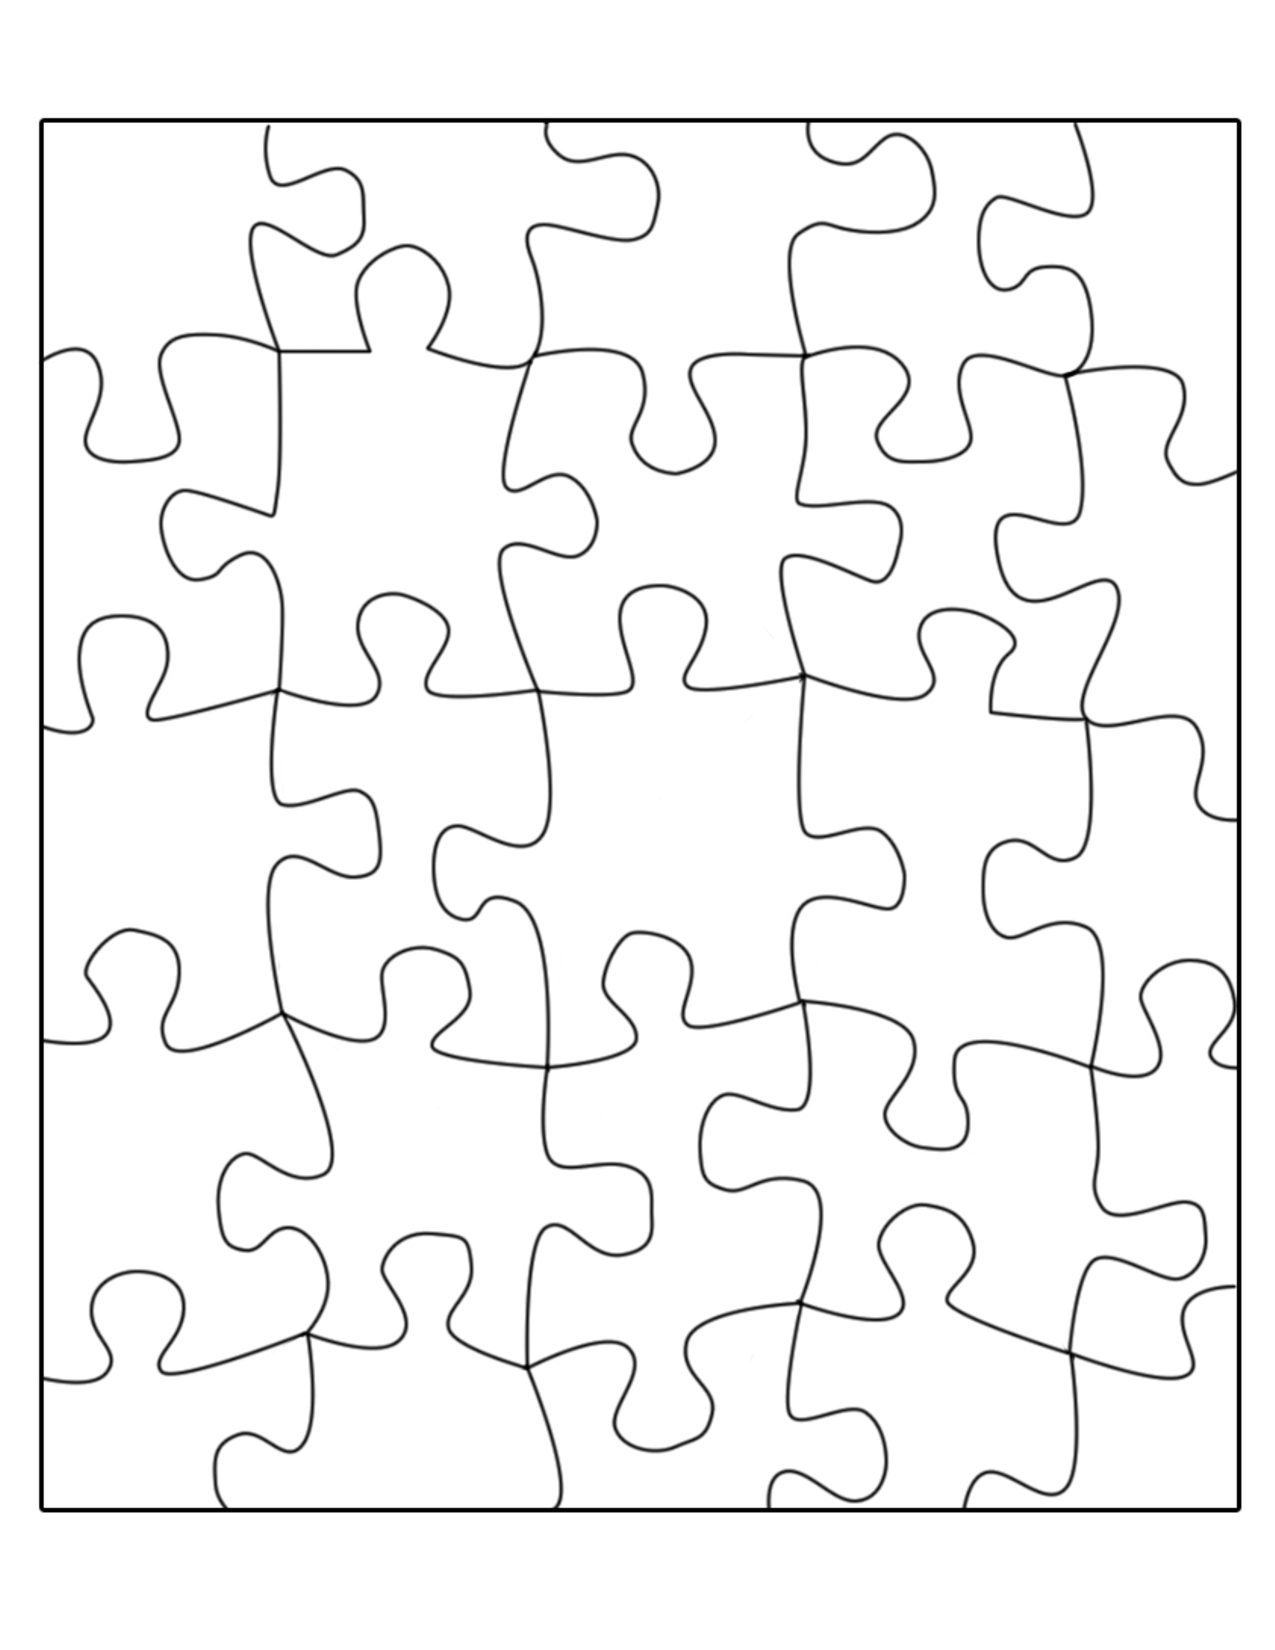 29 Images Of 16-Piece Jigsaw Puzzle Template 8.5X11 | Sofond - Printable Puzzle Template 8.5 X 11